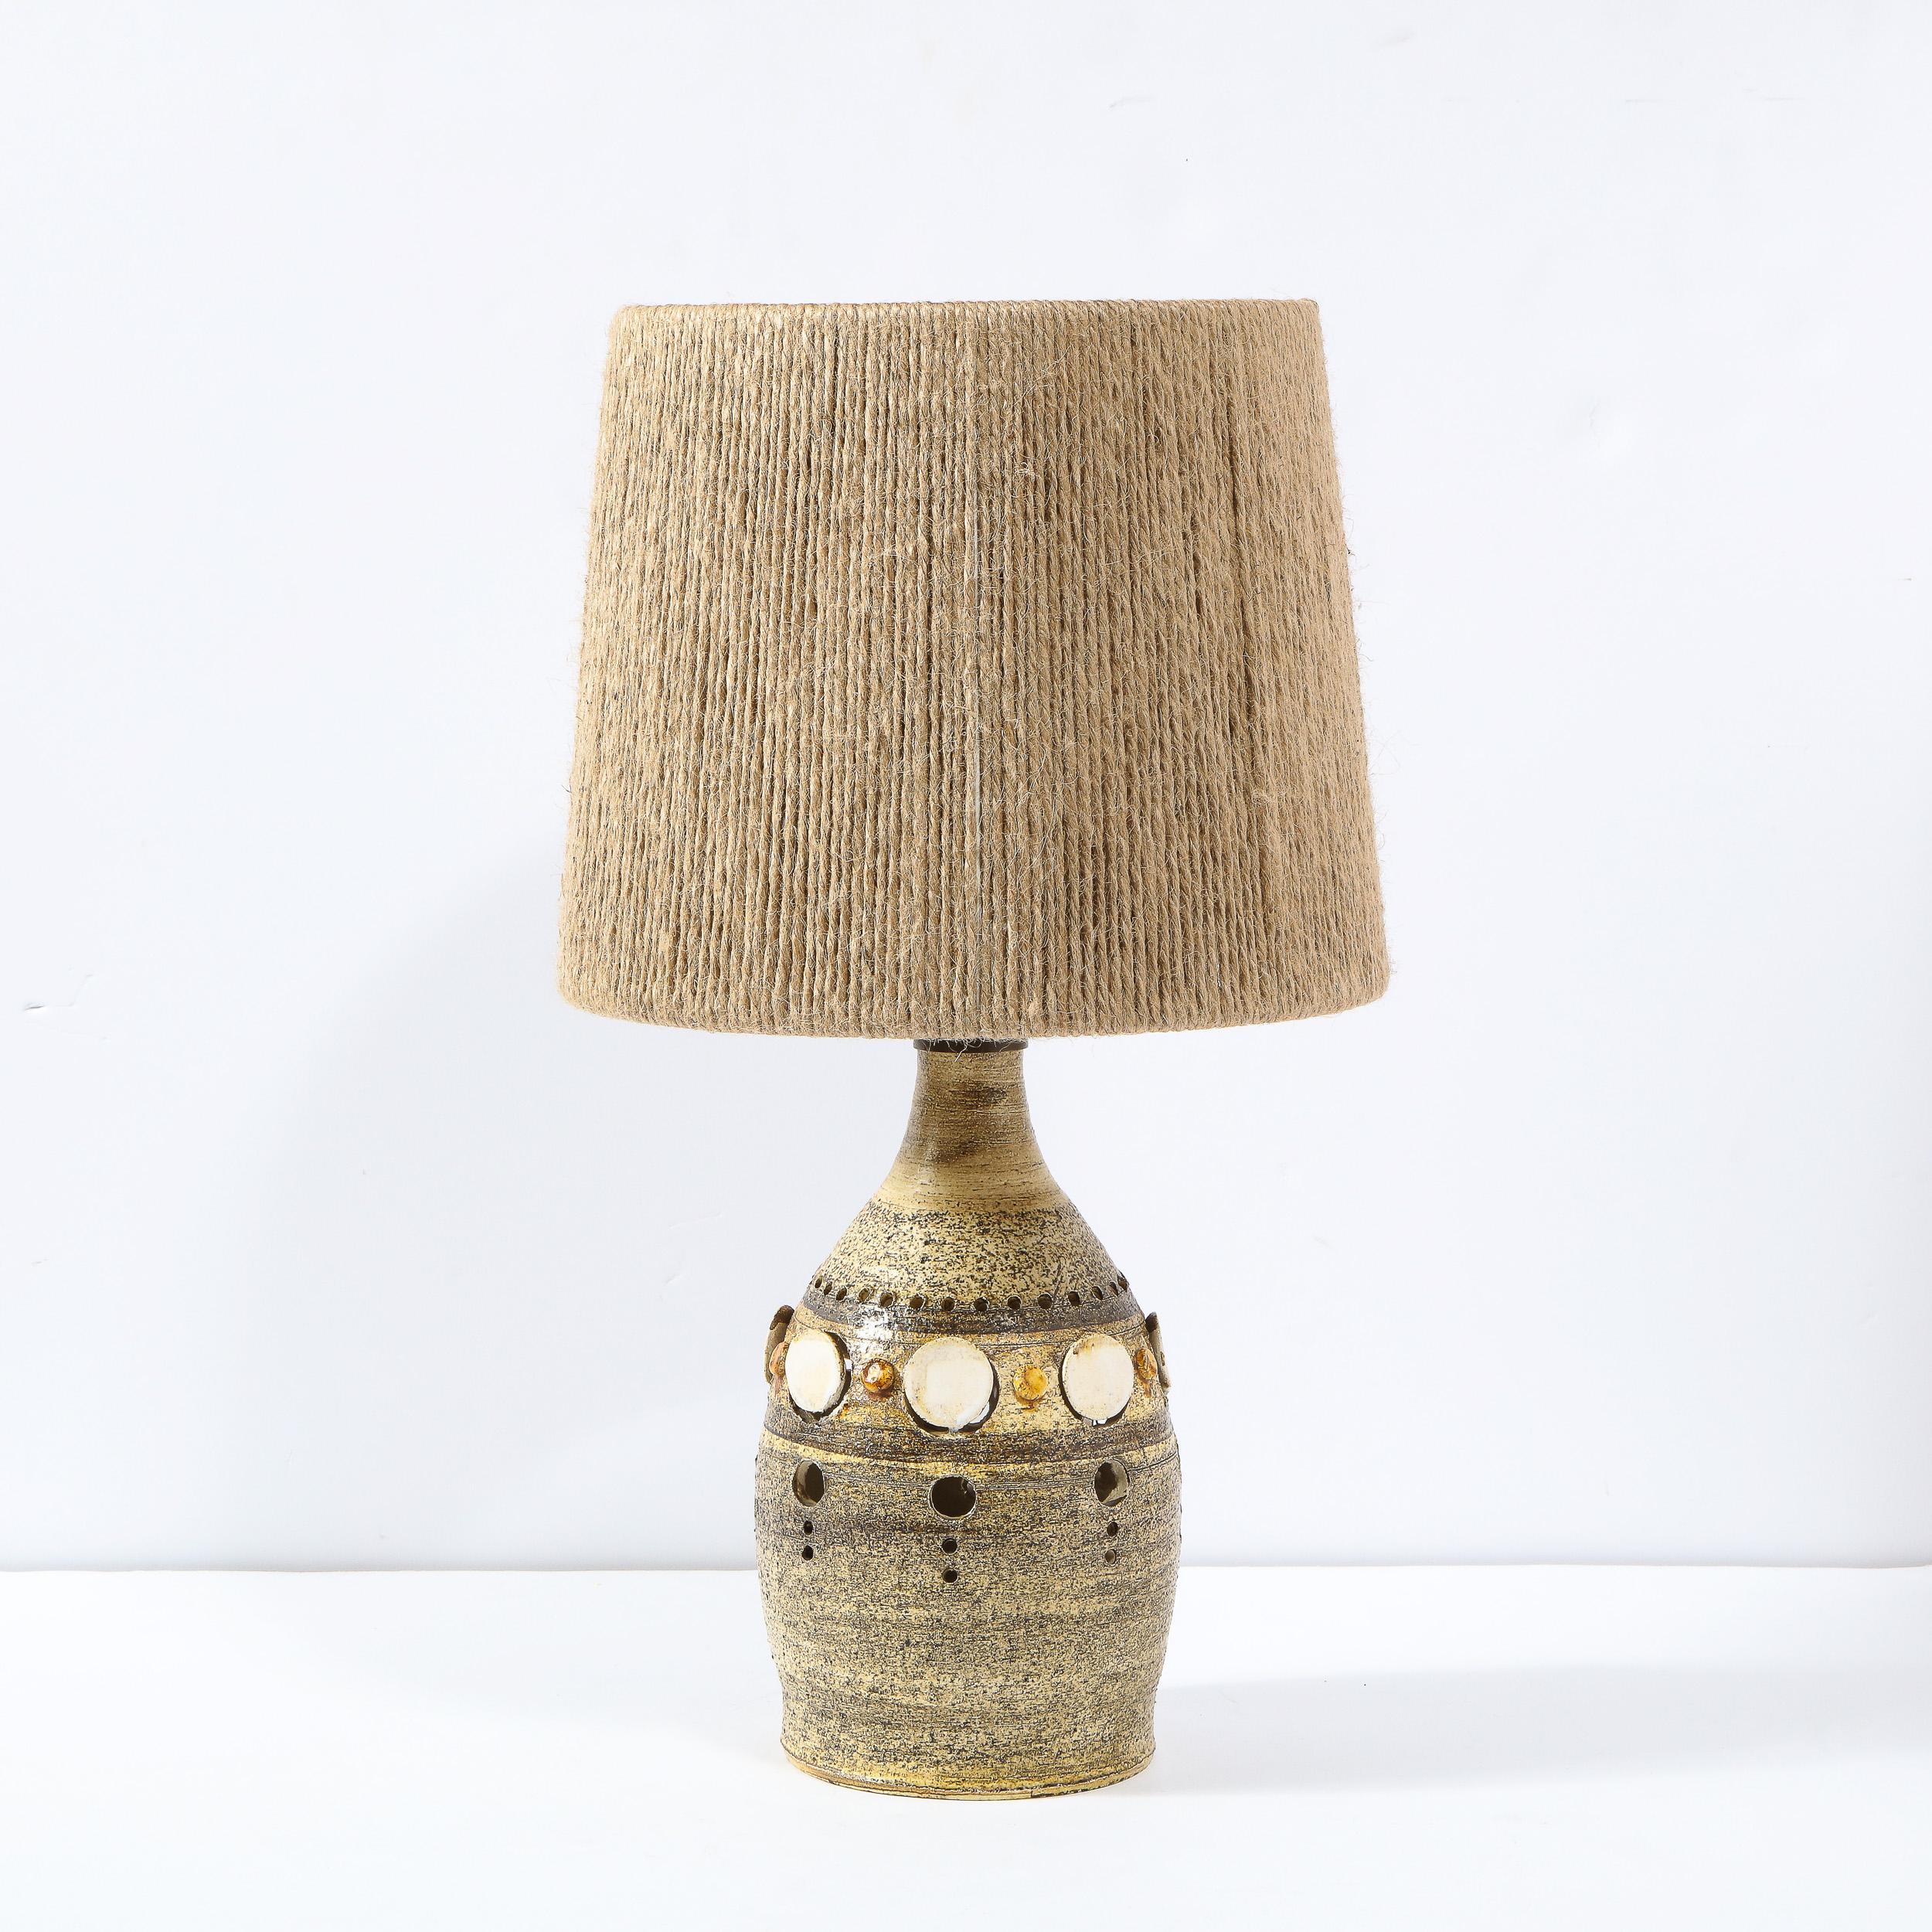 This sophisticated Mid-Century Modern table lamp was realized by the acclaimed designed Georges Pelletier in France, circa 1950. It features a conical ceramic body hand painted in a rich espresso hue with chestnut accents throughout and circular cut